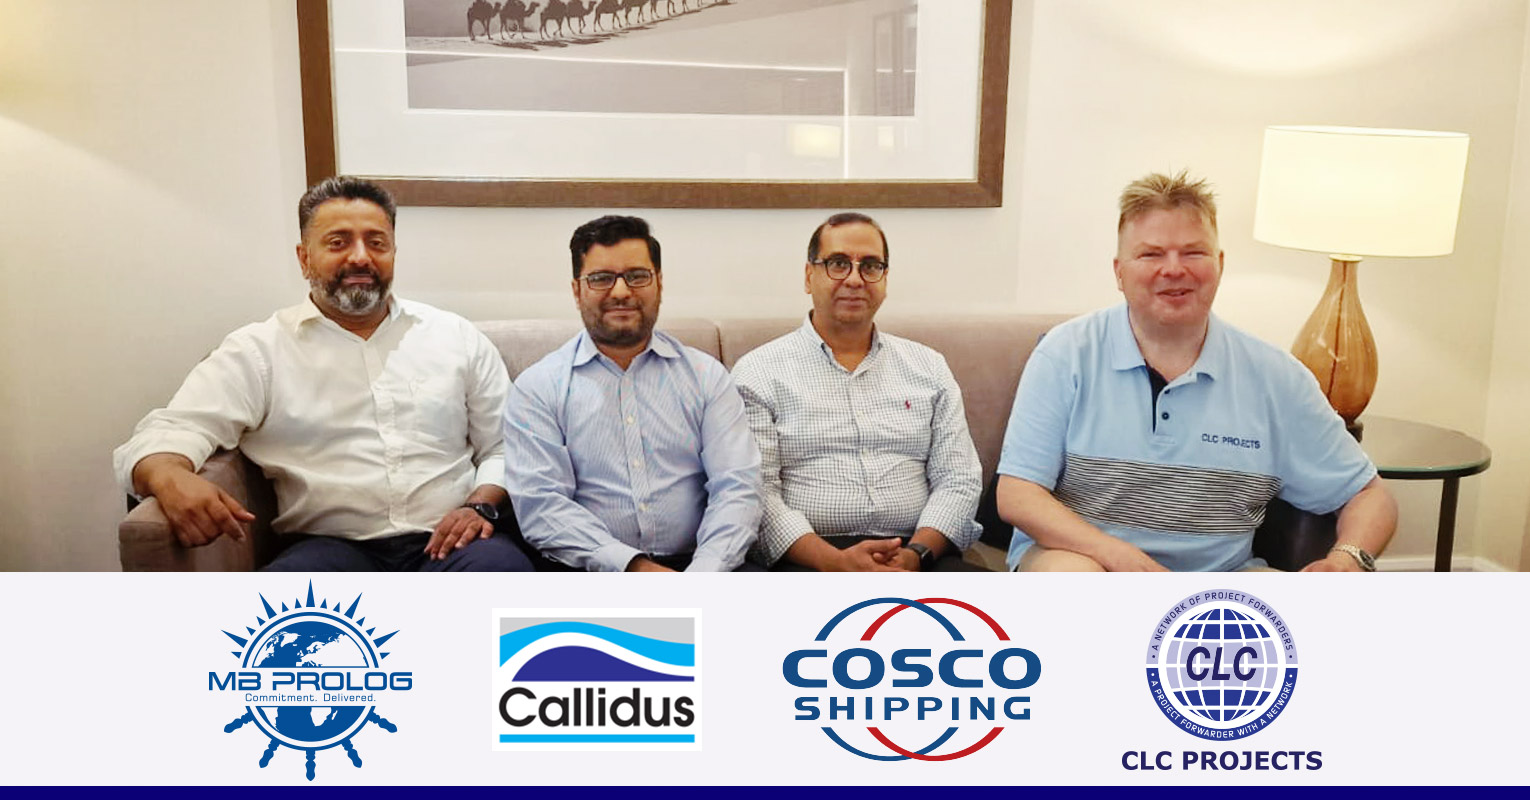 CLC Projects Chairman meeting with Vikas Karthikeyan of MB Projects and Logistics, Joy Thattil Ittoop of Callidus Lawfirm and Ali Raza of COSCO Specialized Carriers in Dubai, UAE